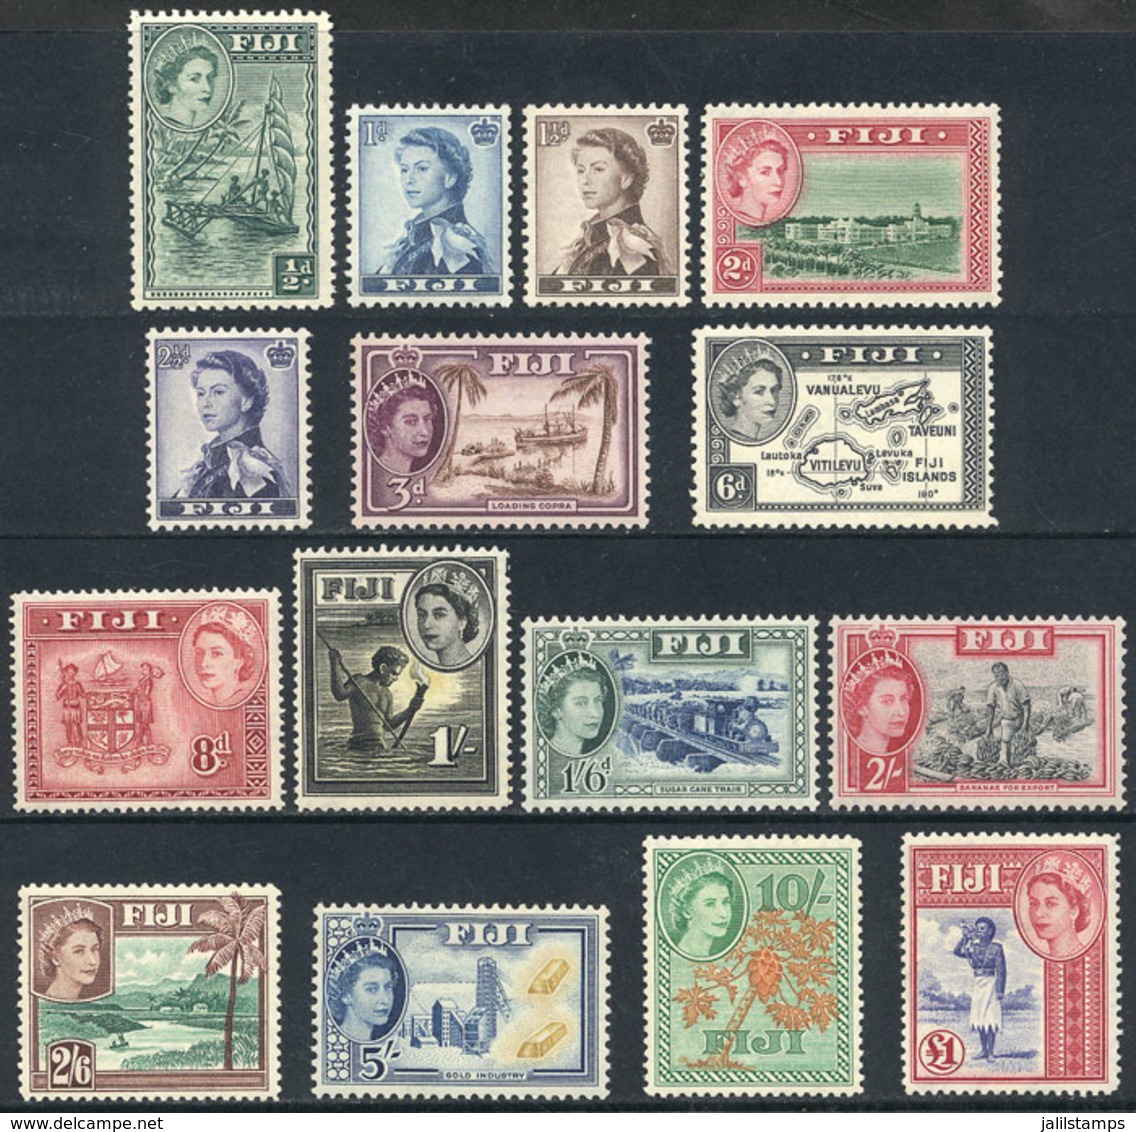 FIJI: Sc.147/162, 1954/6 Elizabeth And Other Topics, Compl. Set Of 15 Mint Values, Most Unmounted (2 Or 3 Very Lightly H - Fidji (...-1970)